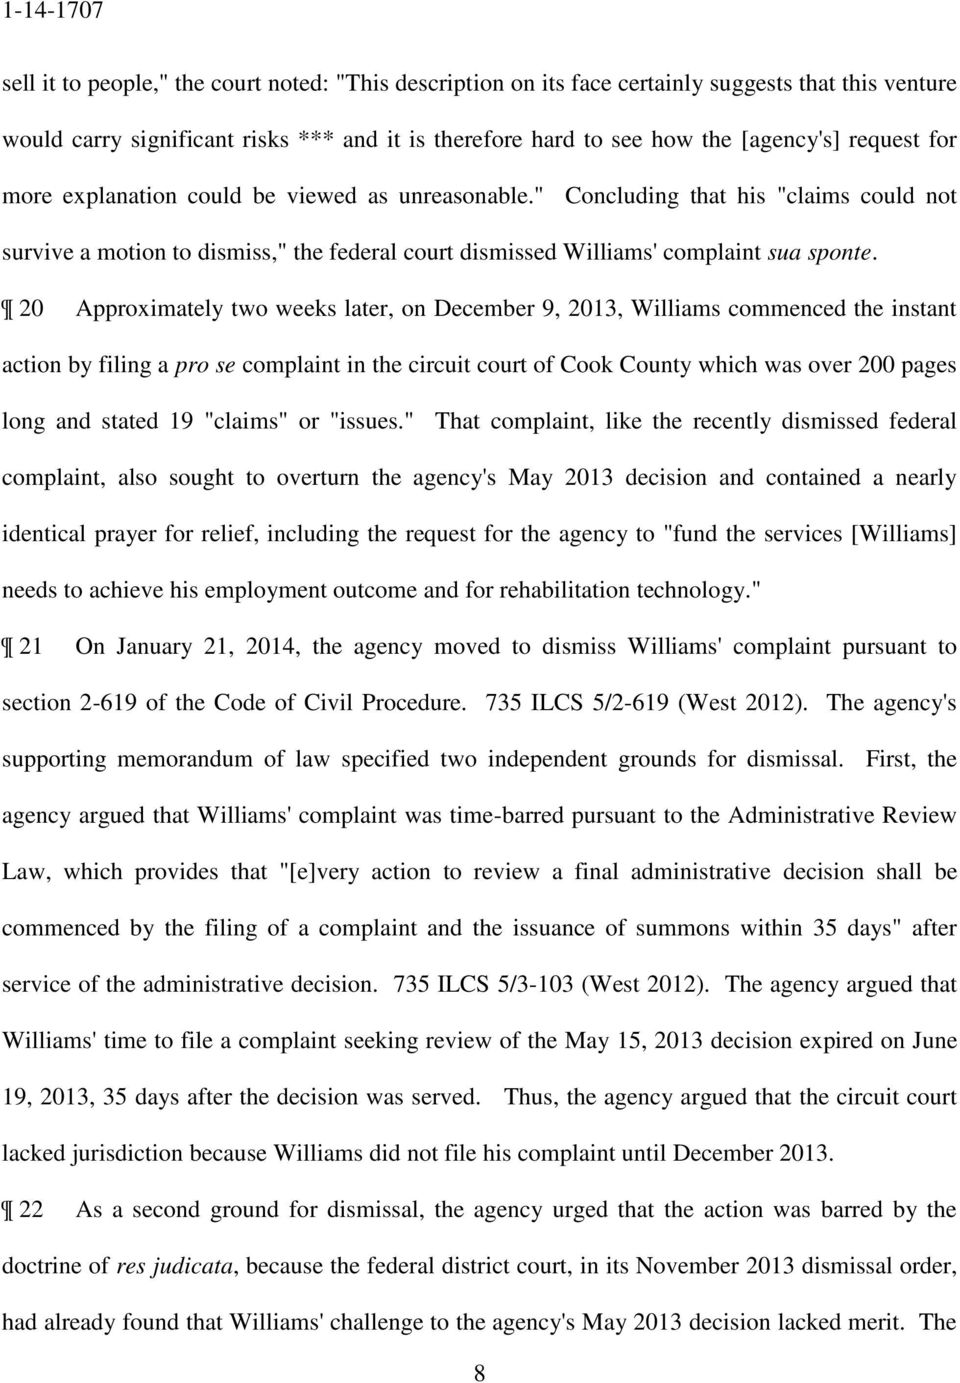 20 Approximately two weeks later, on December 9, 2013, Williams commenced the instant action by filing a pro se complaint in the circuit court of Cook County which was over 200 pages long and stated